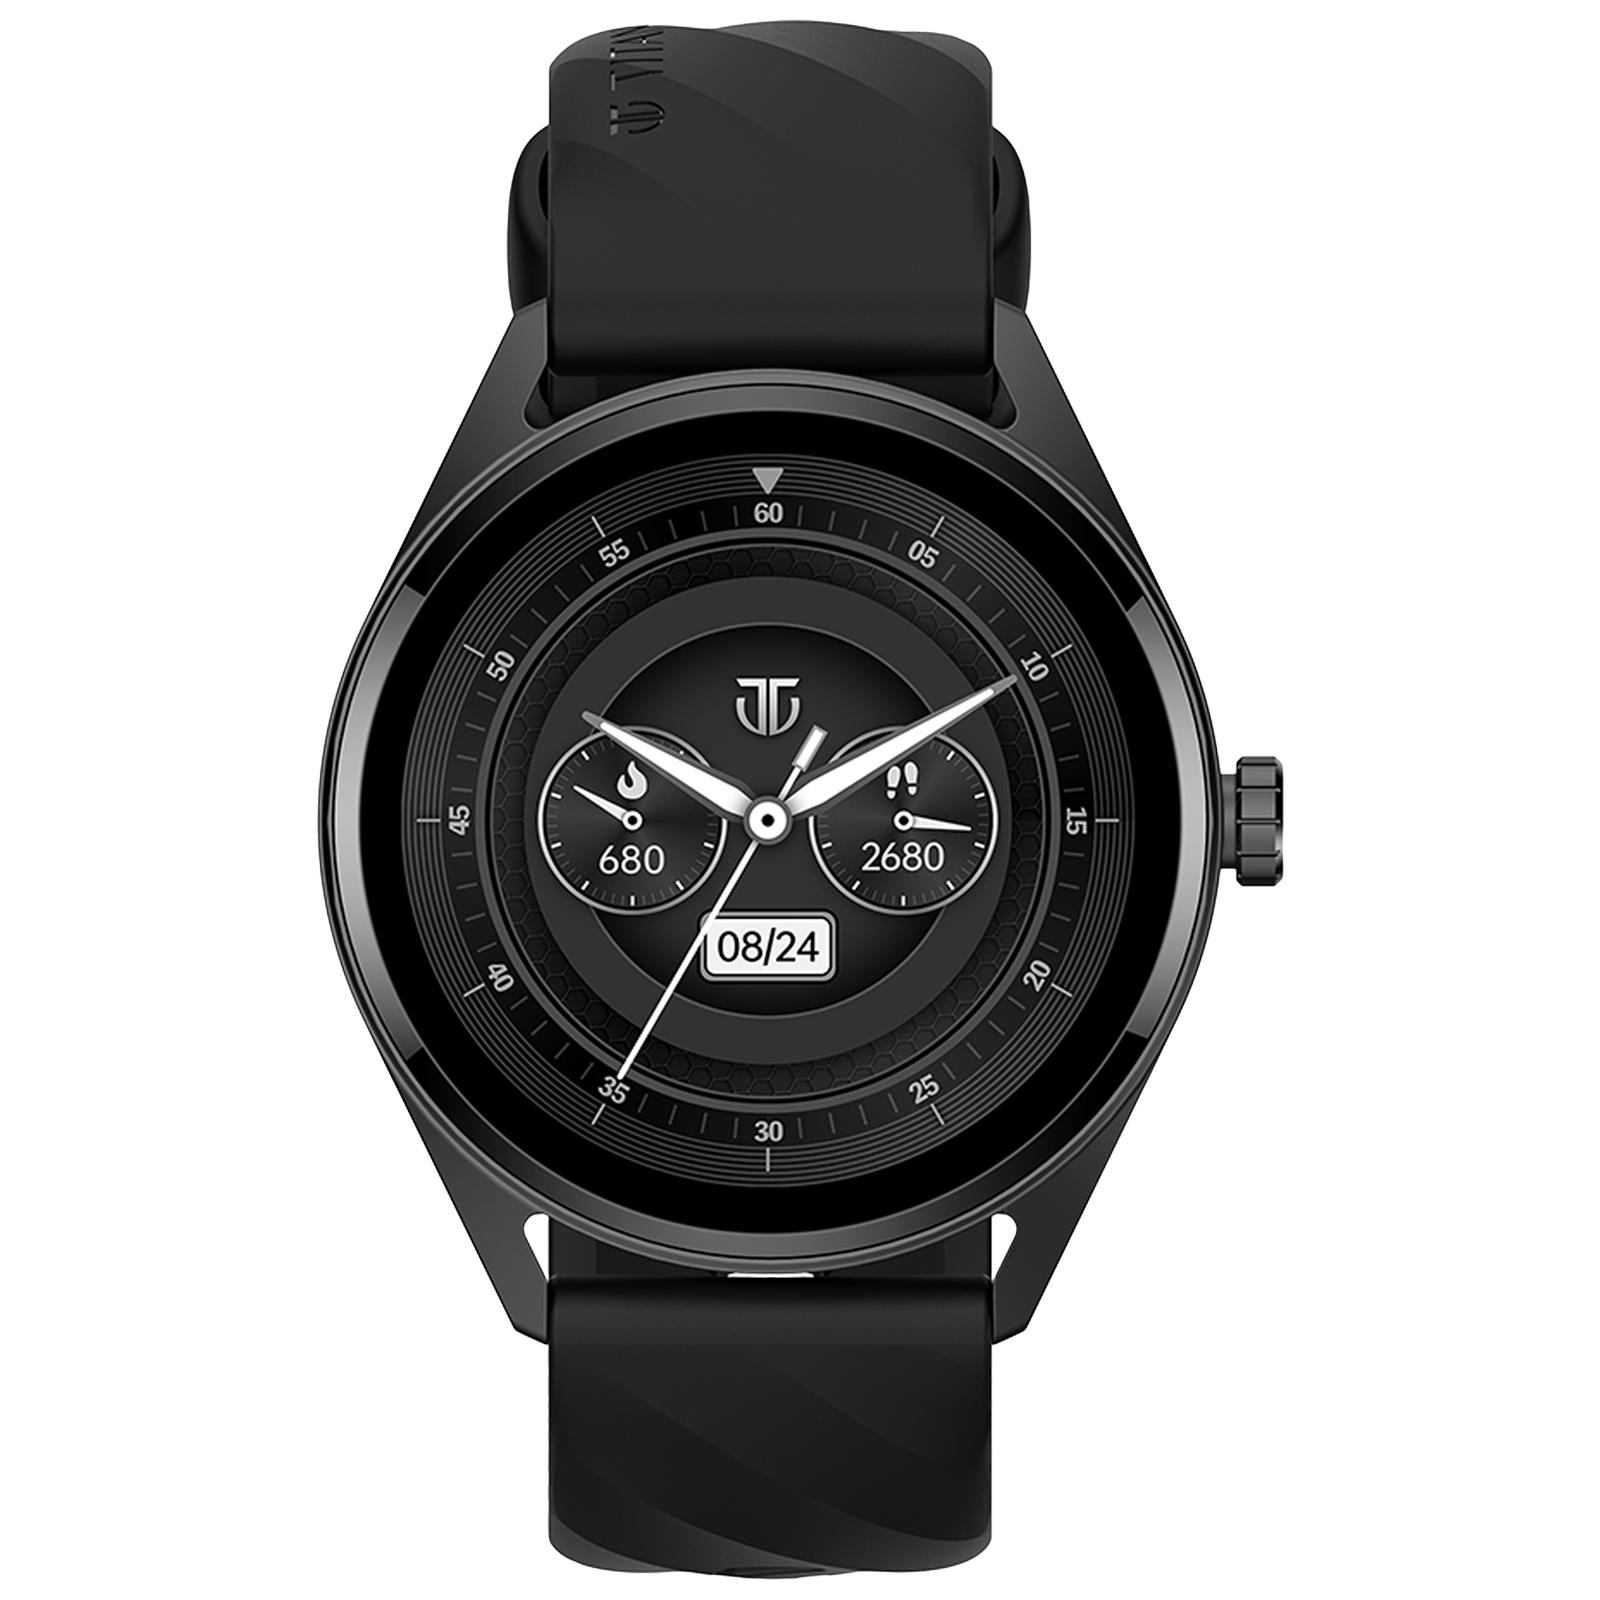 TITAN Crest Smartwatch with Bluetooth Calling (36.3mm AMOLED Display, IP68 Water Resistant, Black Strap)